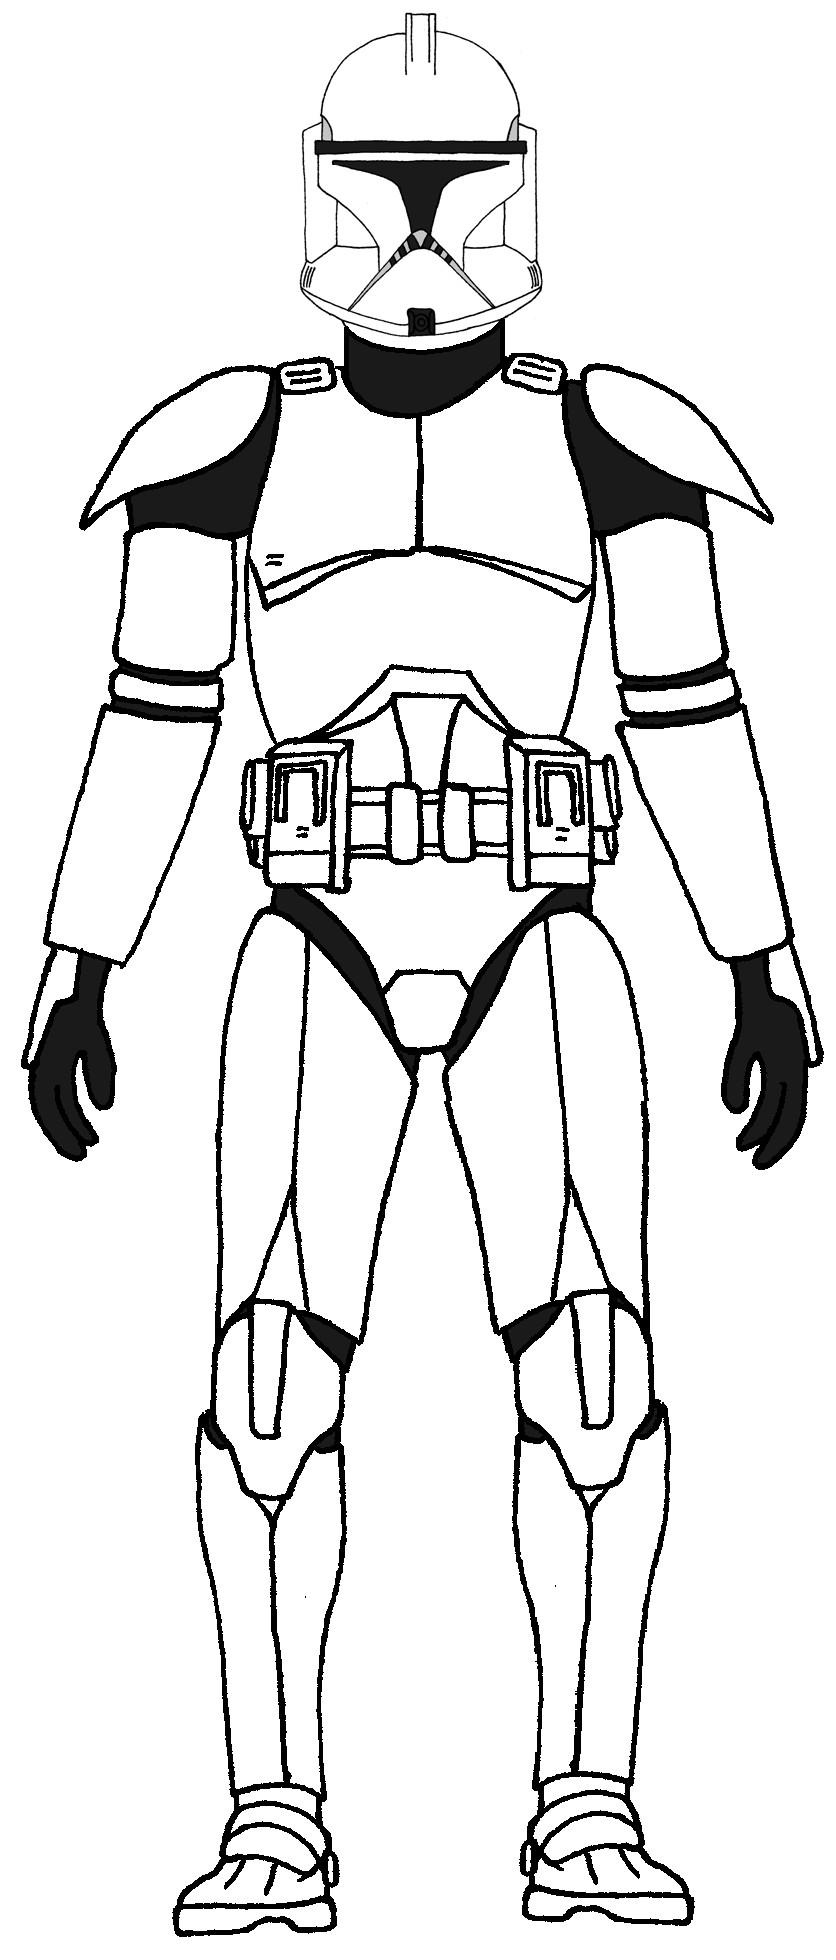 Lego Stormtrooper Coloring Pages at GetColorings.com ...